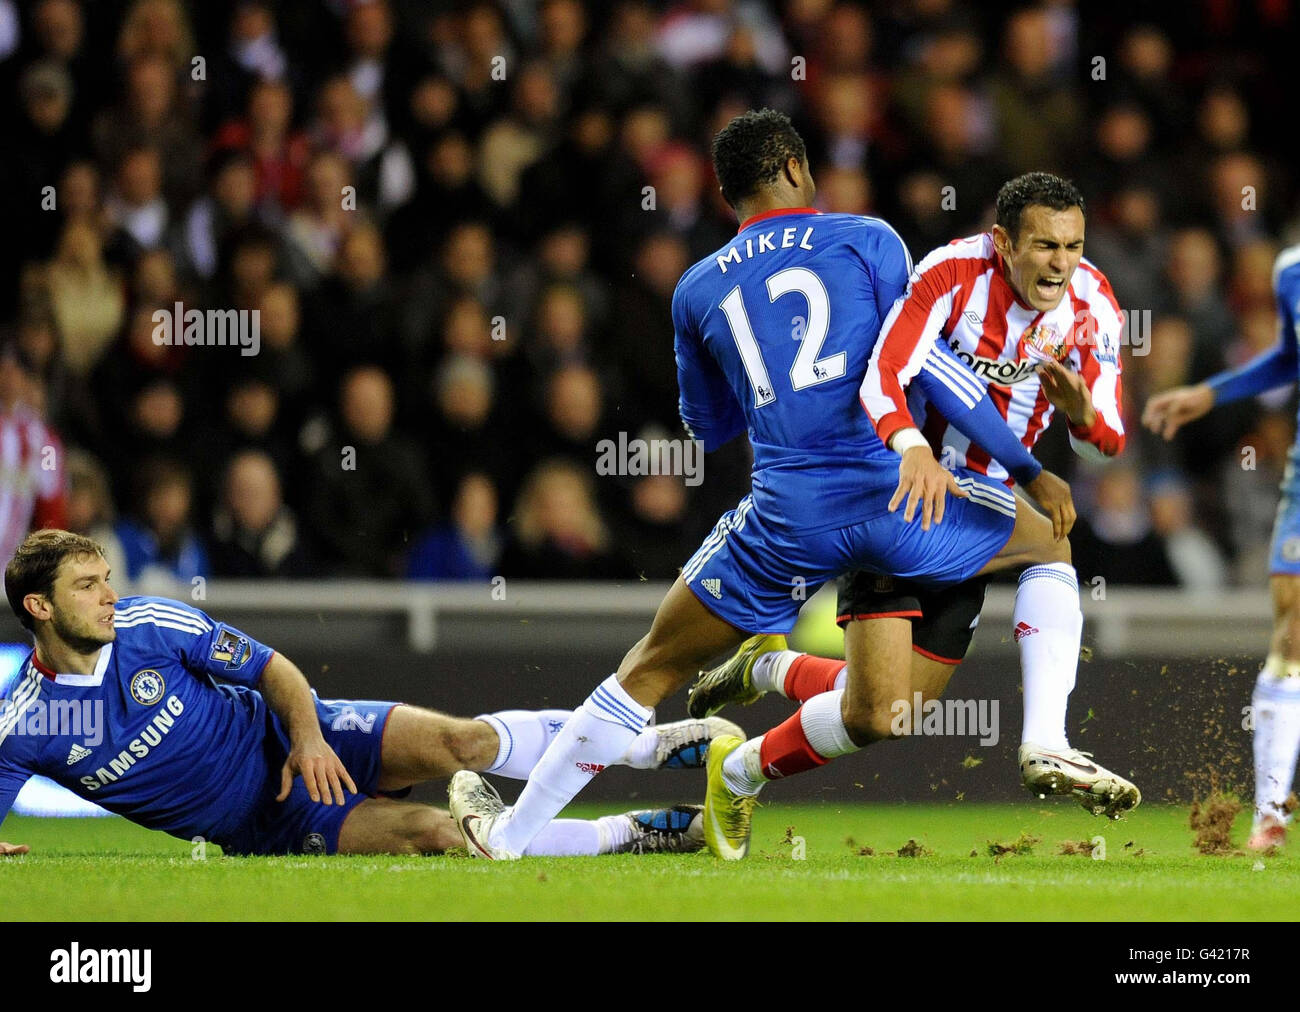 Sunderland's Ahmed Elmohamdy (right) is fouled by Chelsea's John Obi Mikkel, which lead to a free kick for Sunderland from which Kieran Richardson scored during the Barclays Premier League match at the Stadium of Light, Sunderland. Stock Photo